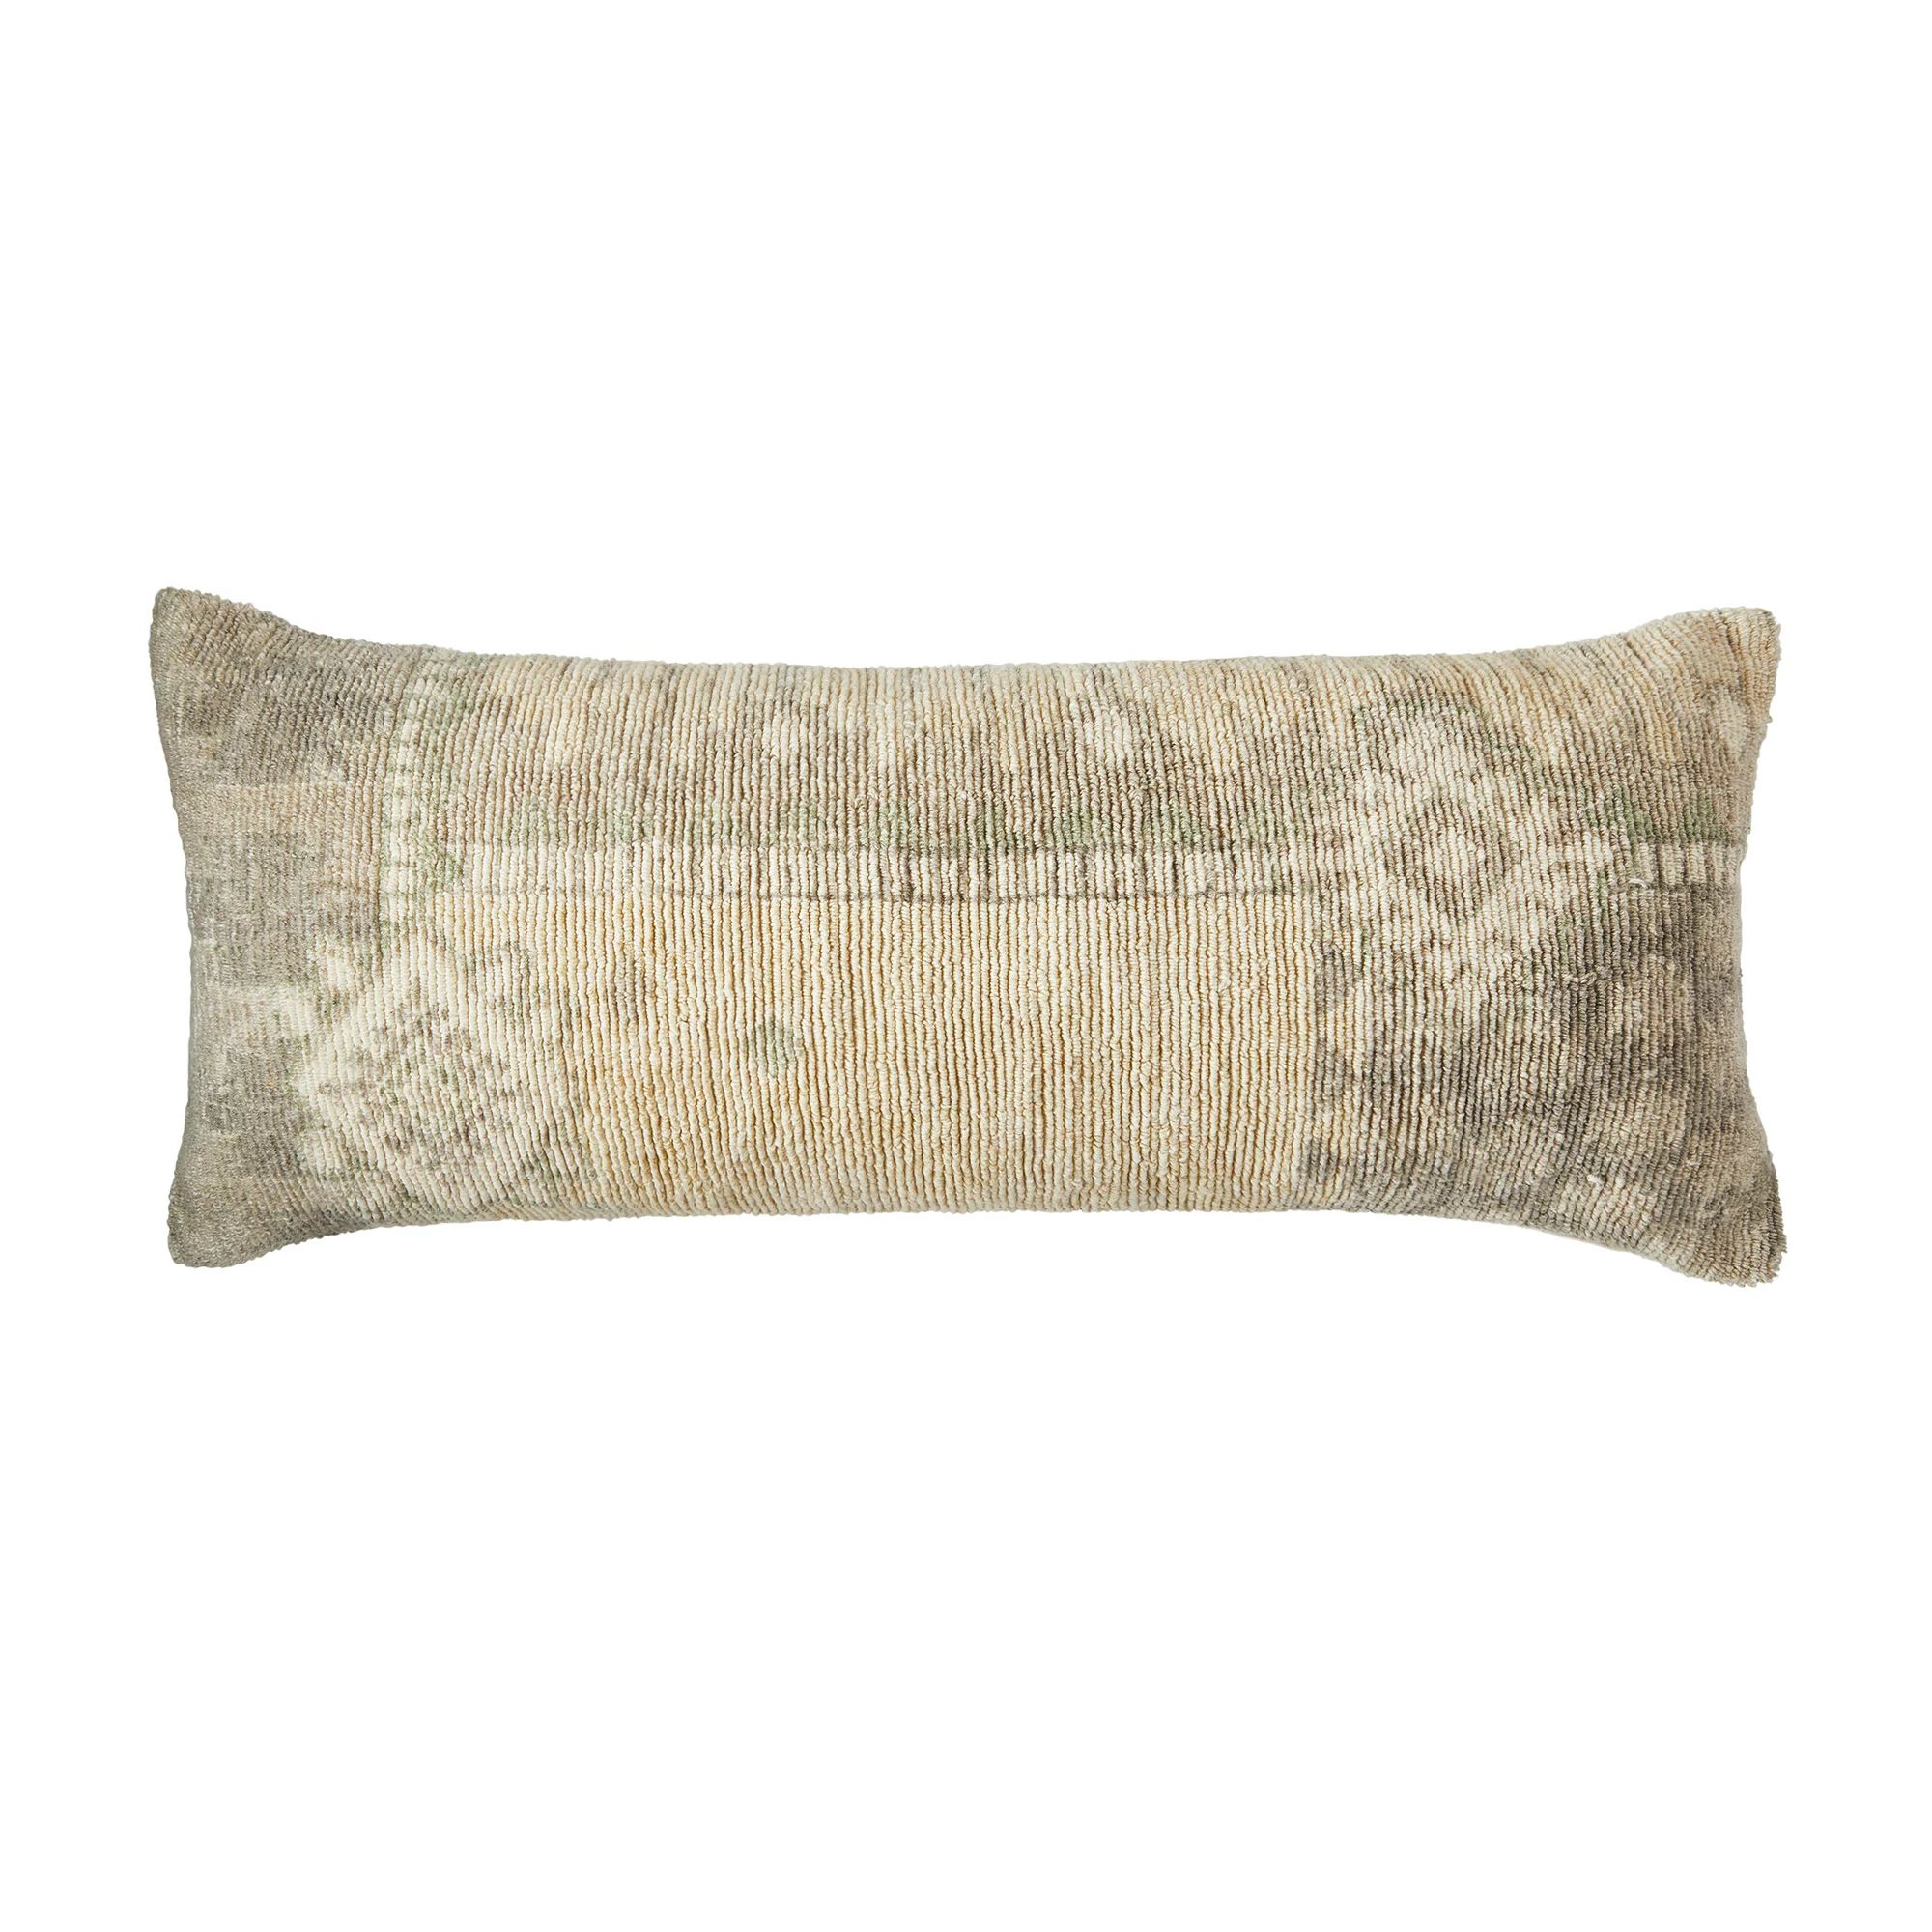 Better Homes & Gardens Sage Persian Patchwork 14" x 36" Pillow by Dave & Jenny Marrs | Walmart (US)